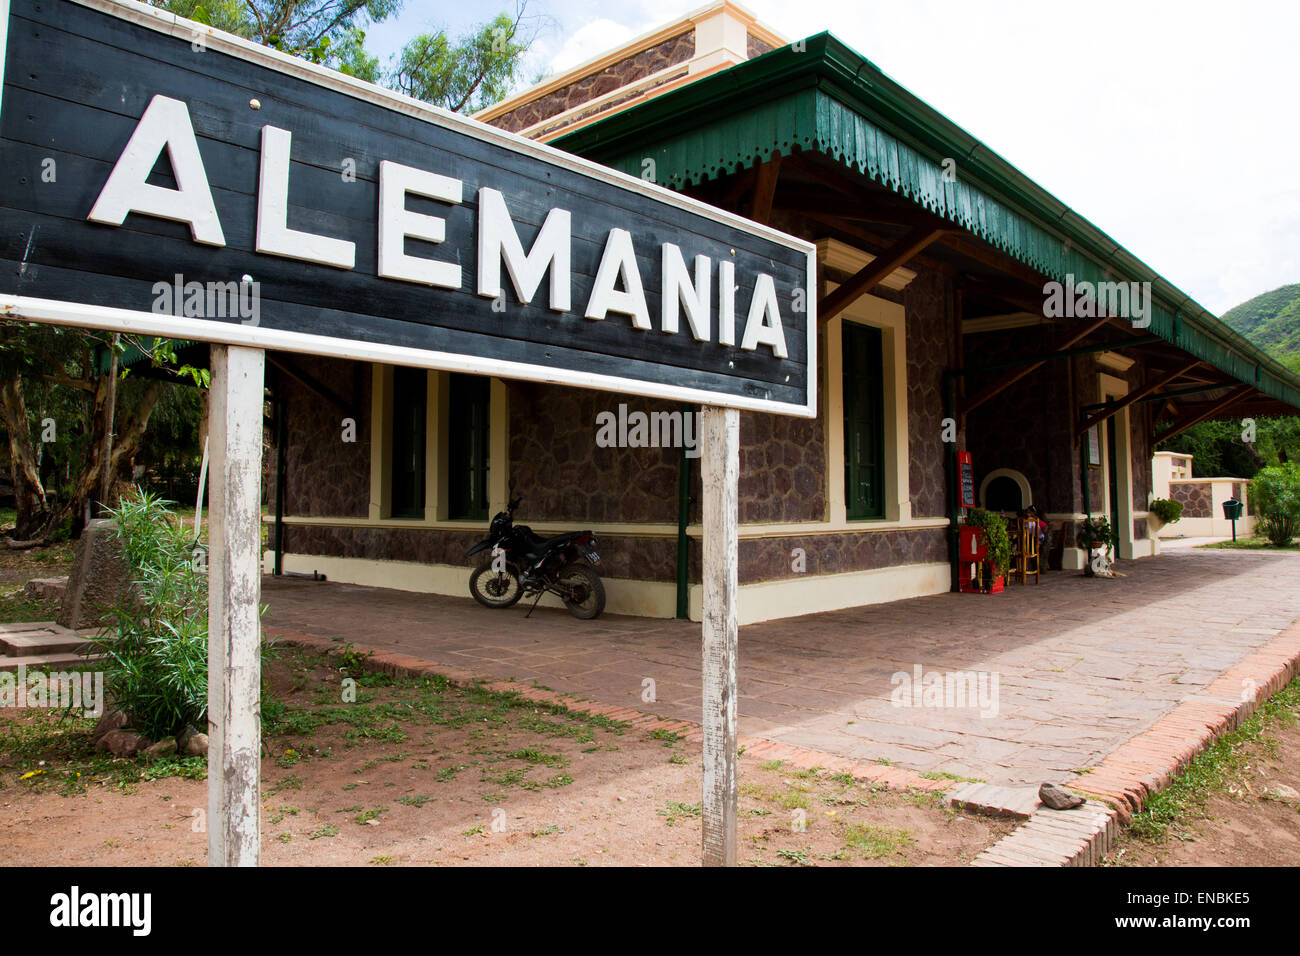 Abandoned train station at Alemania, a small town in Valles Calchaquies, province of Salta, Argentina. Stock Photo